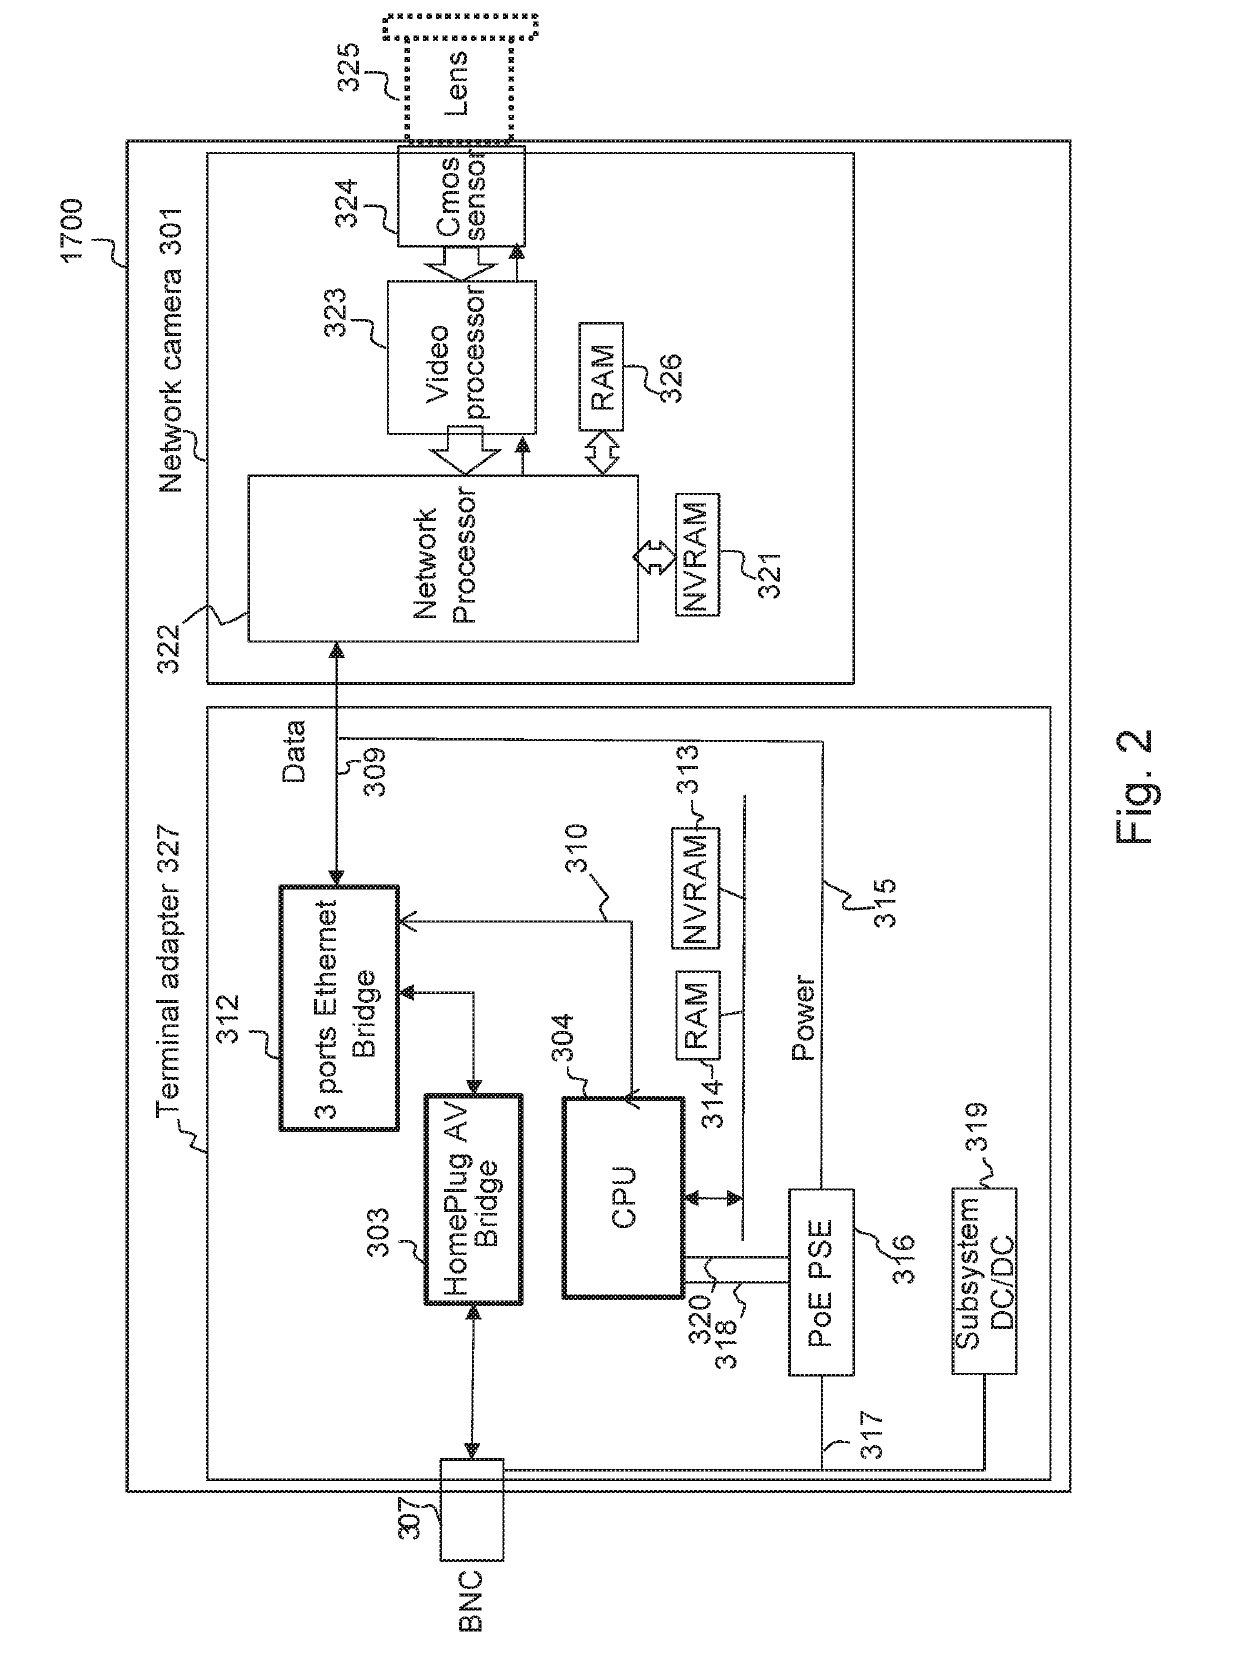 Power management method of a system made of devices powered over data cable